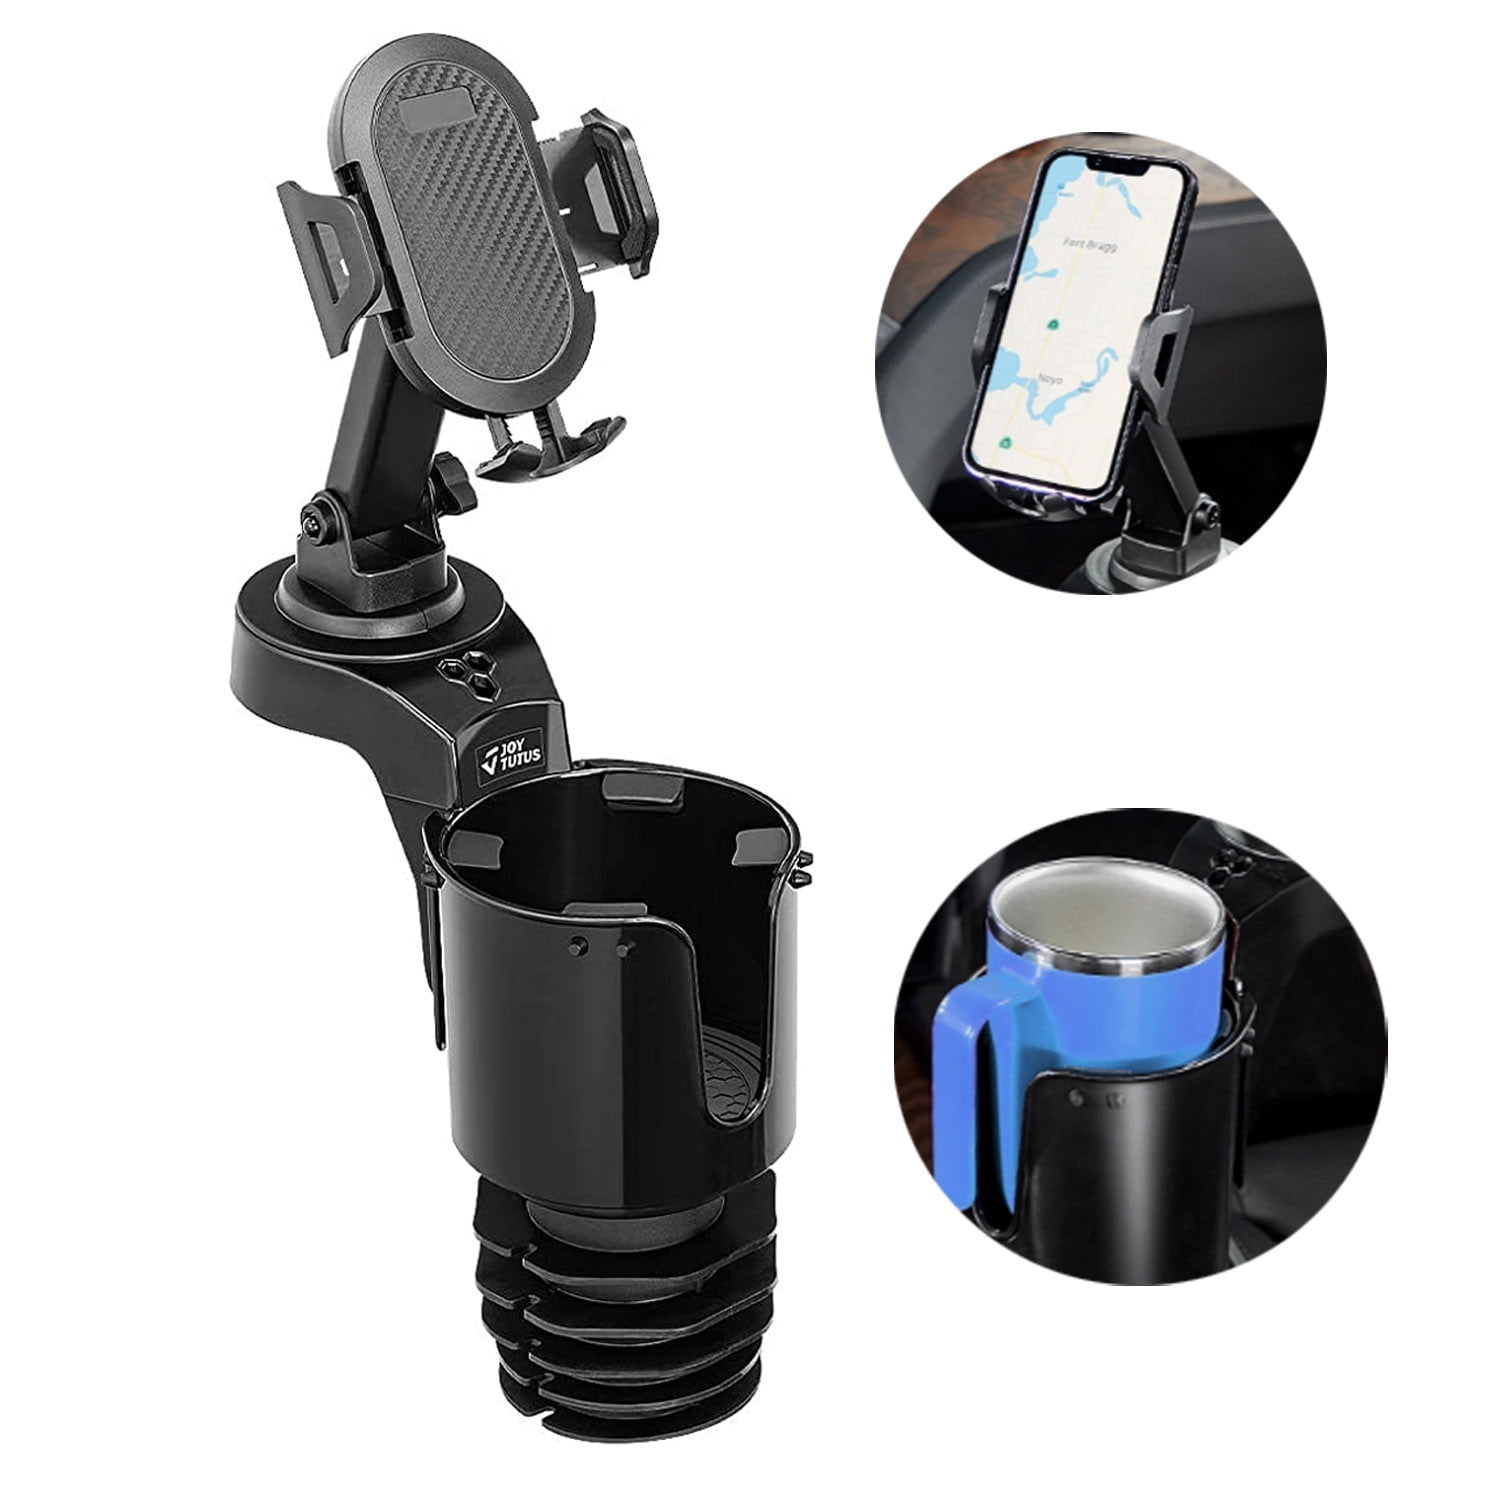 JOYTUTUS Car Cup Holder Phone Mount ,Universal Cell Phone Holder Adjustable Cup  Holder Cradle Car Mount with 360° Rotation Fit in Smartphone with Screen  size from 4-6 inch 